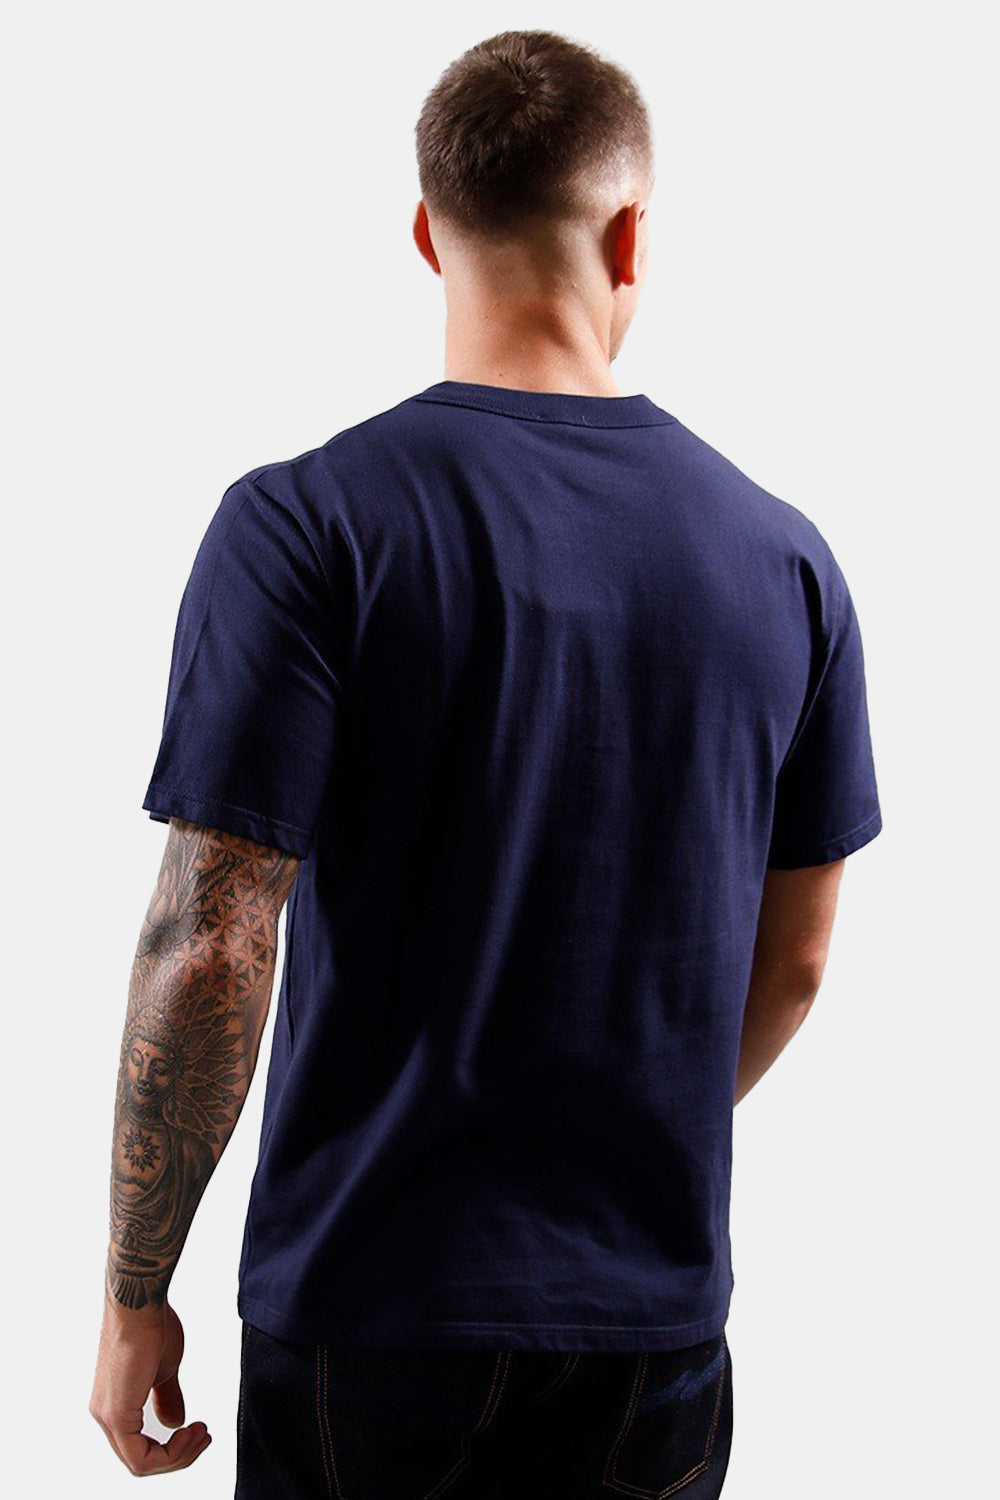 Armor Lux Heritage Pocket T-Shirt (Navire Blue)